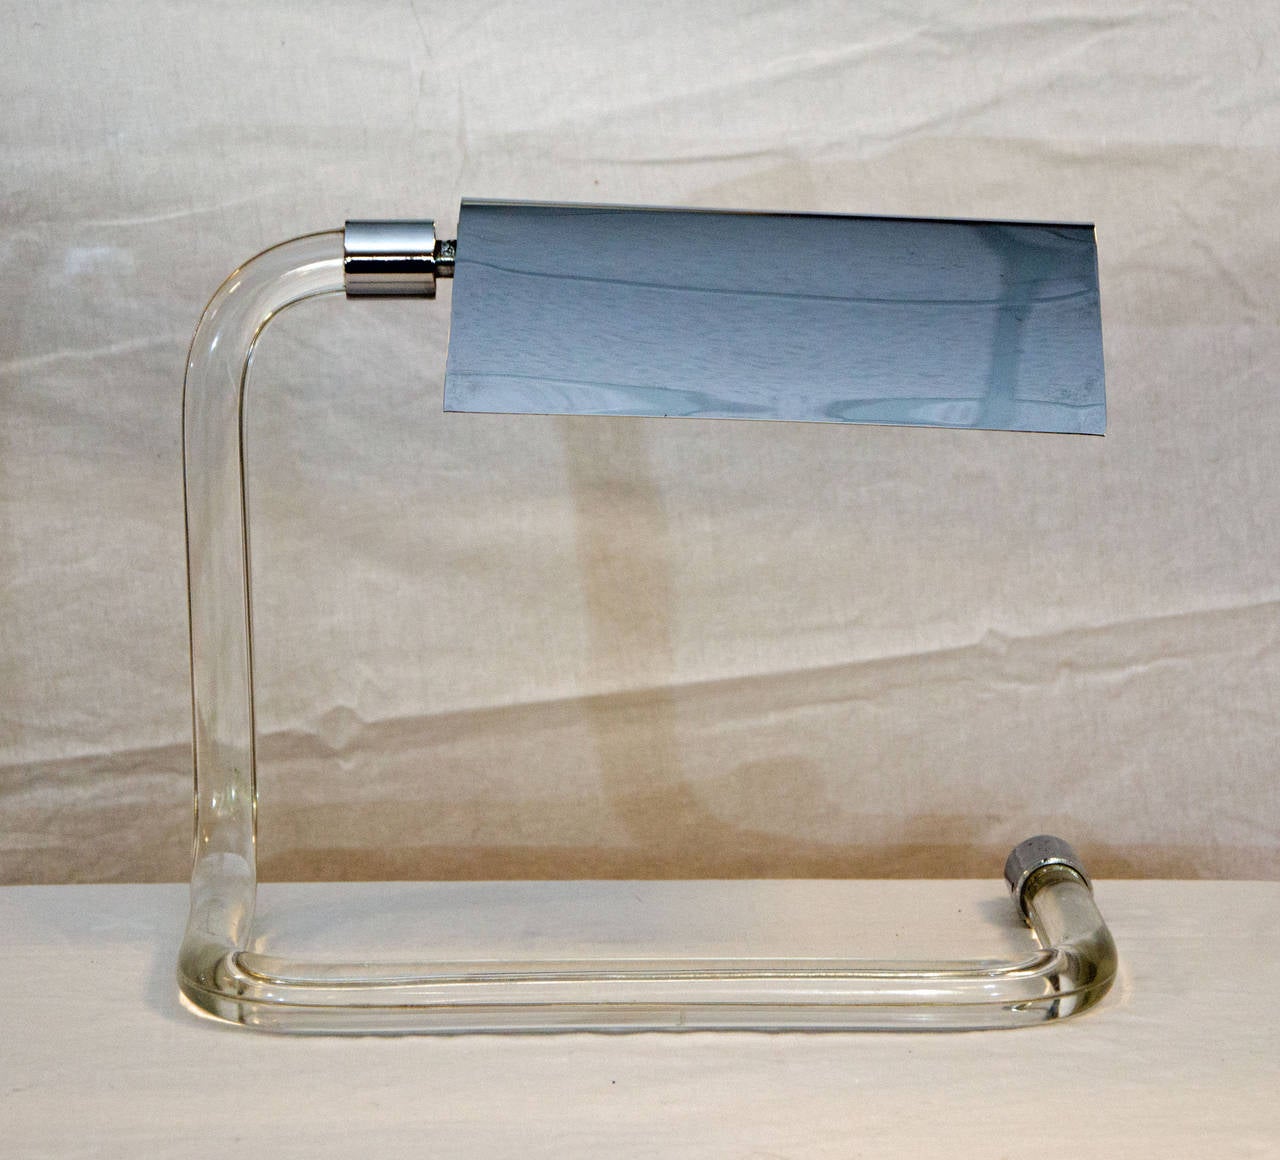 Very stylish mid century or Hollywood regency desk lamp designed by Peter Hamburger for Knoll. The cord is practically invisible inside the bent Lucite base. The swiveling chrome shade takes a tubular light bulb.